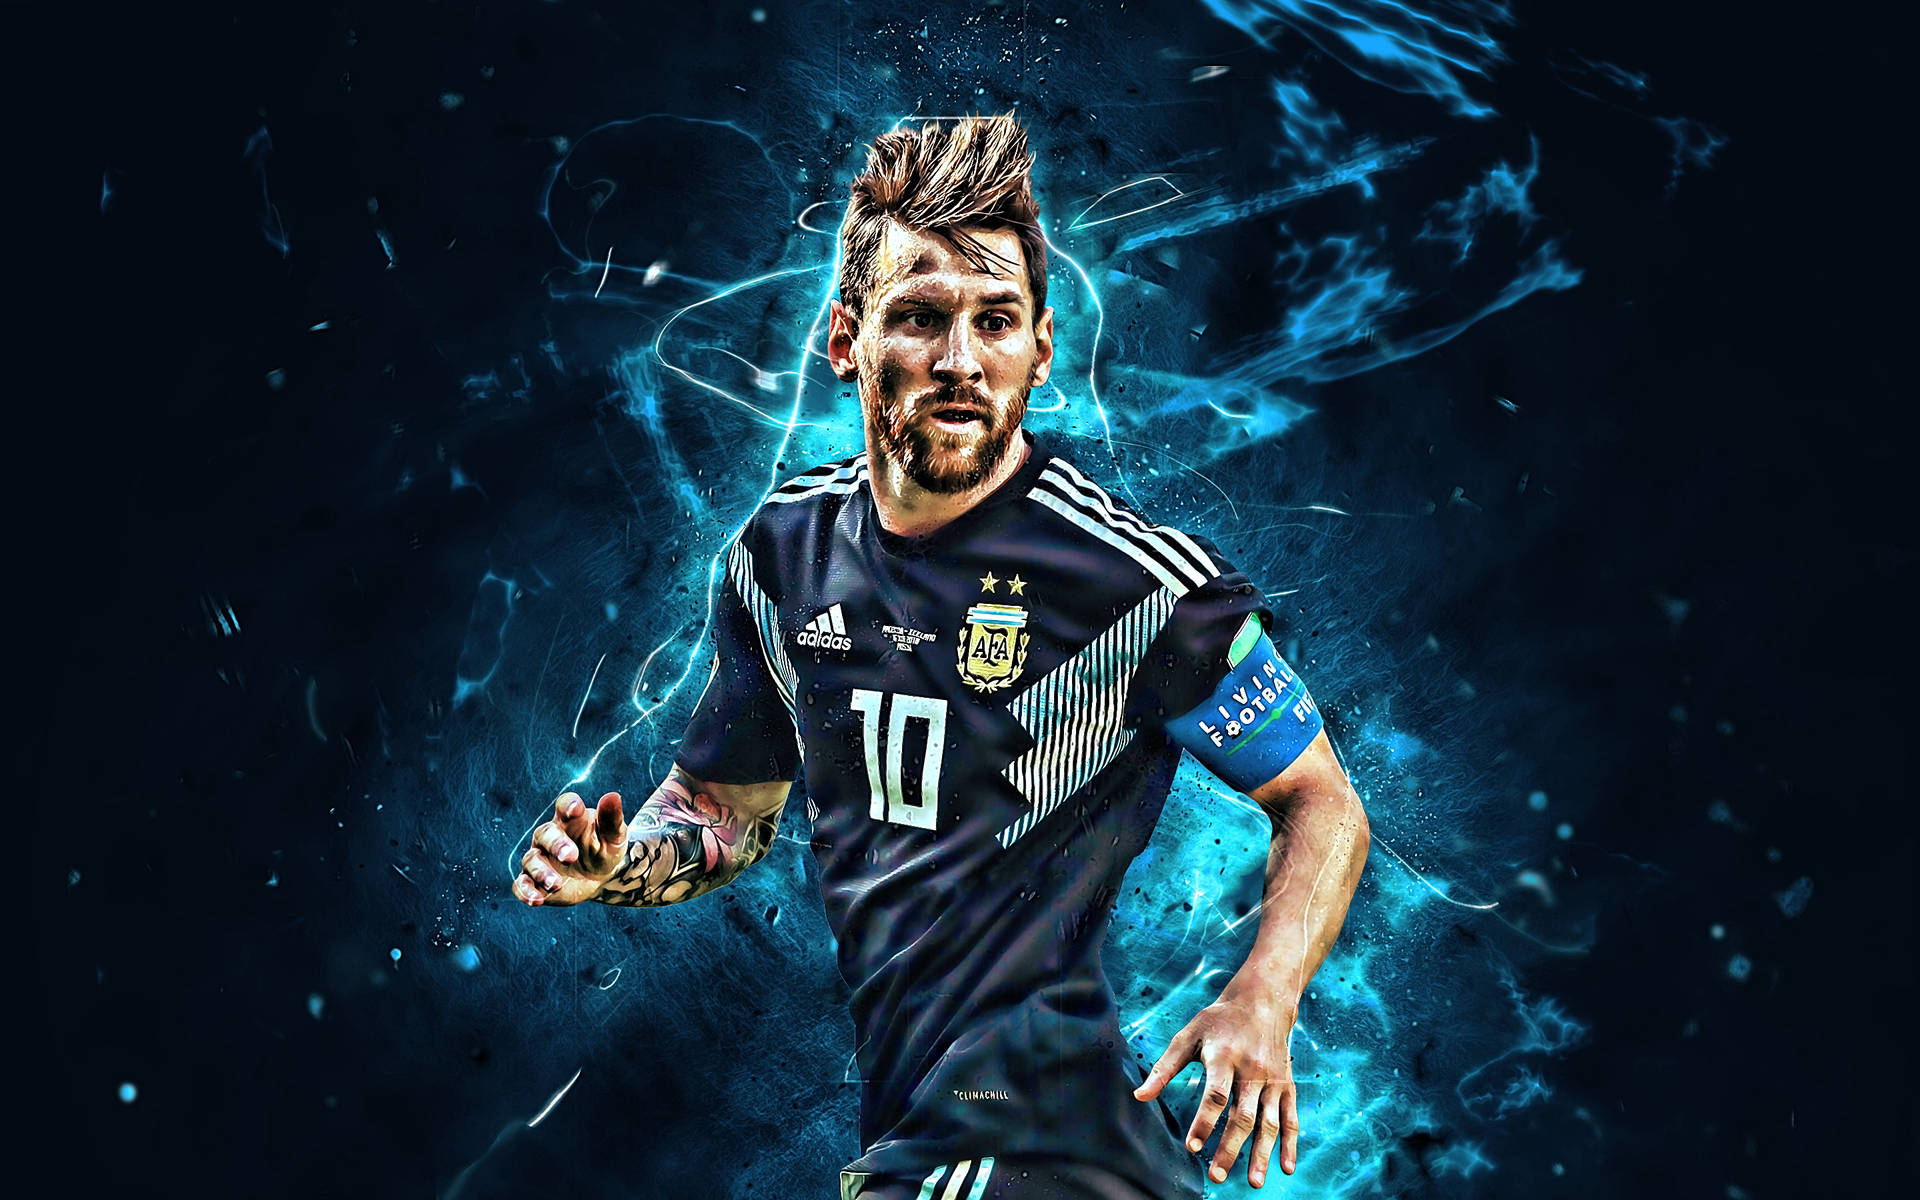 Lionel Messi 2020 With Mohawk Haircut Wallpaper